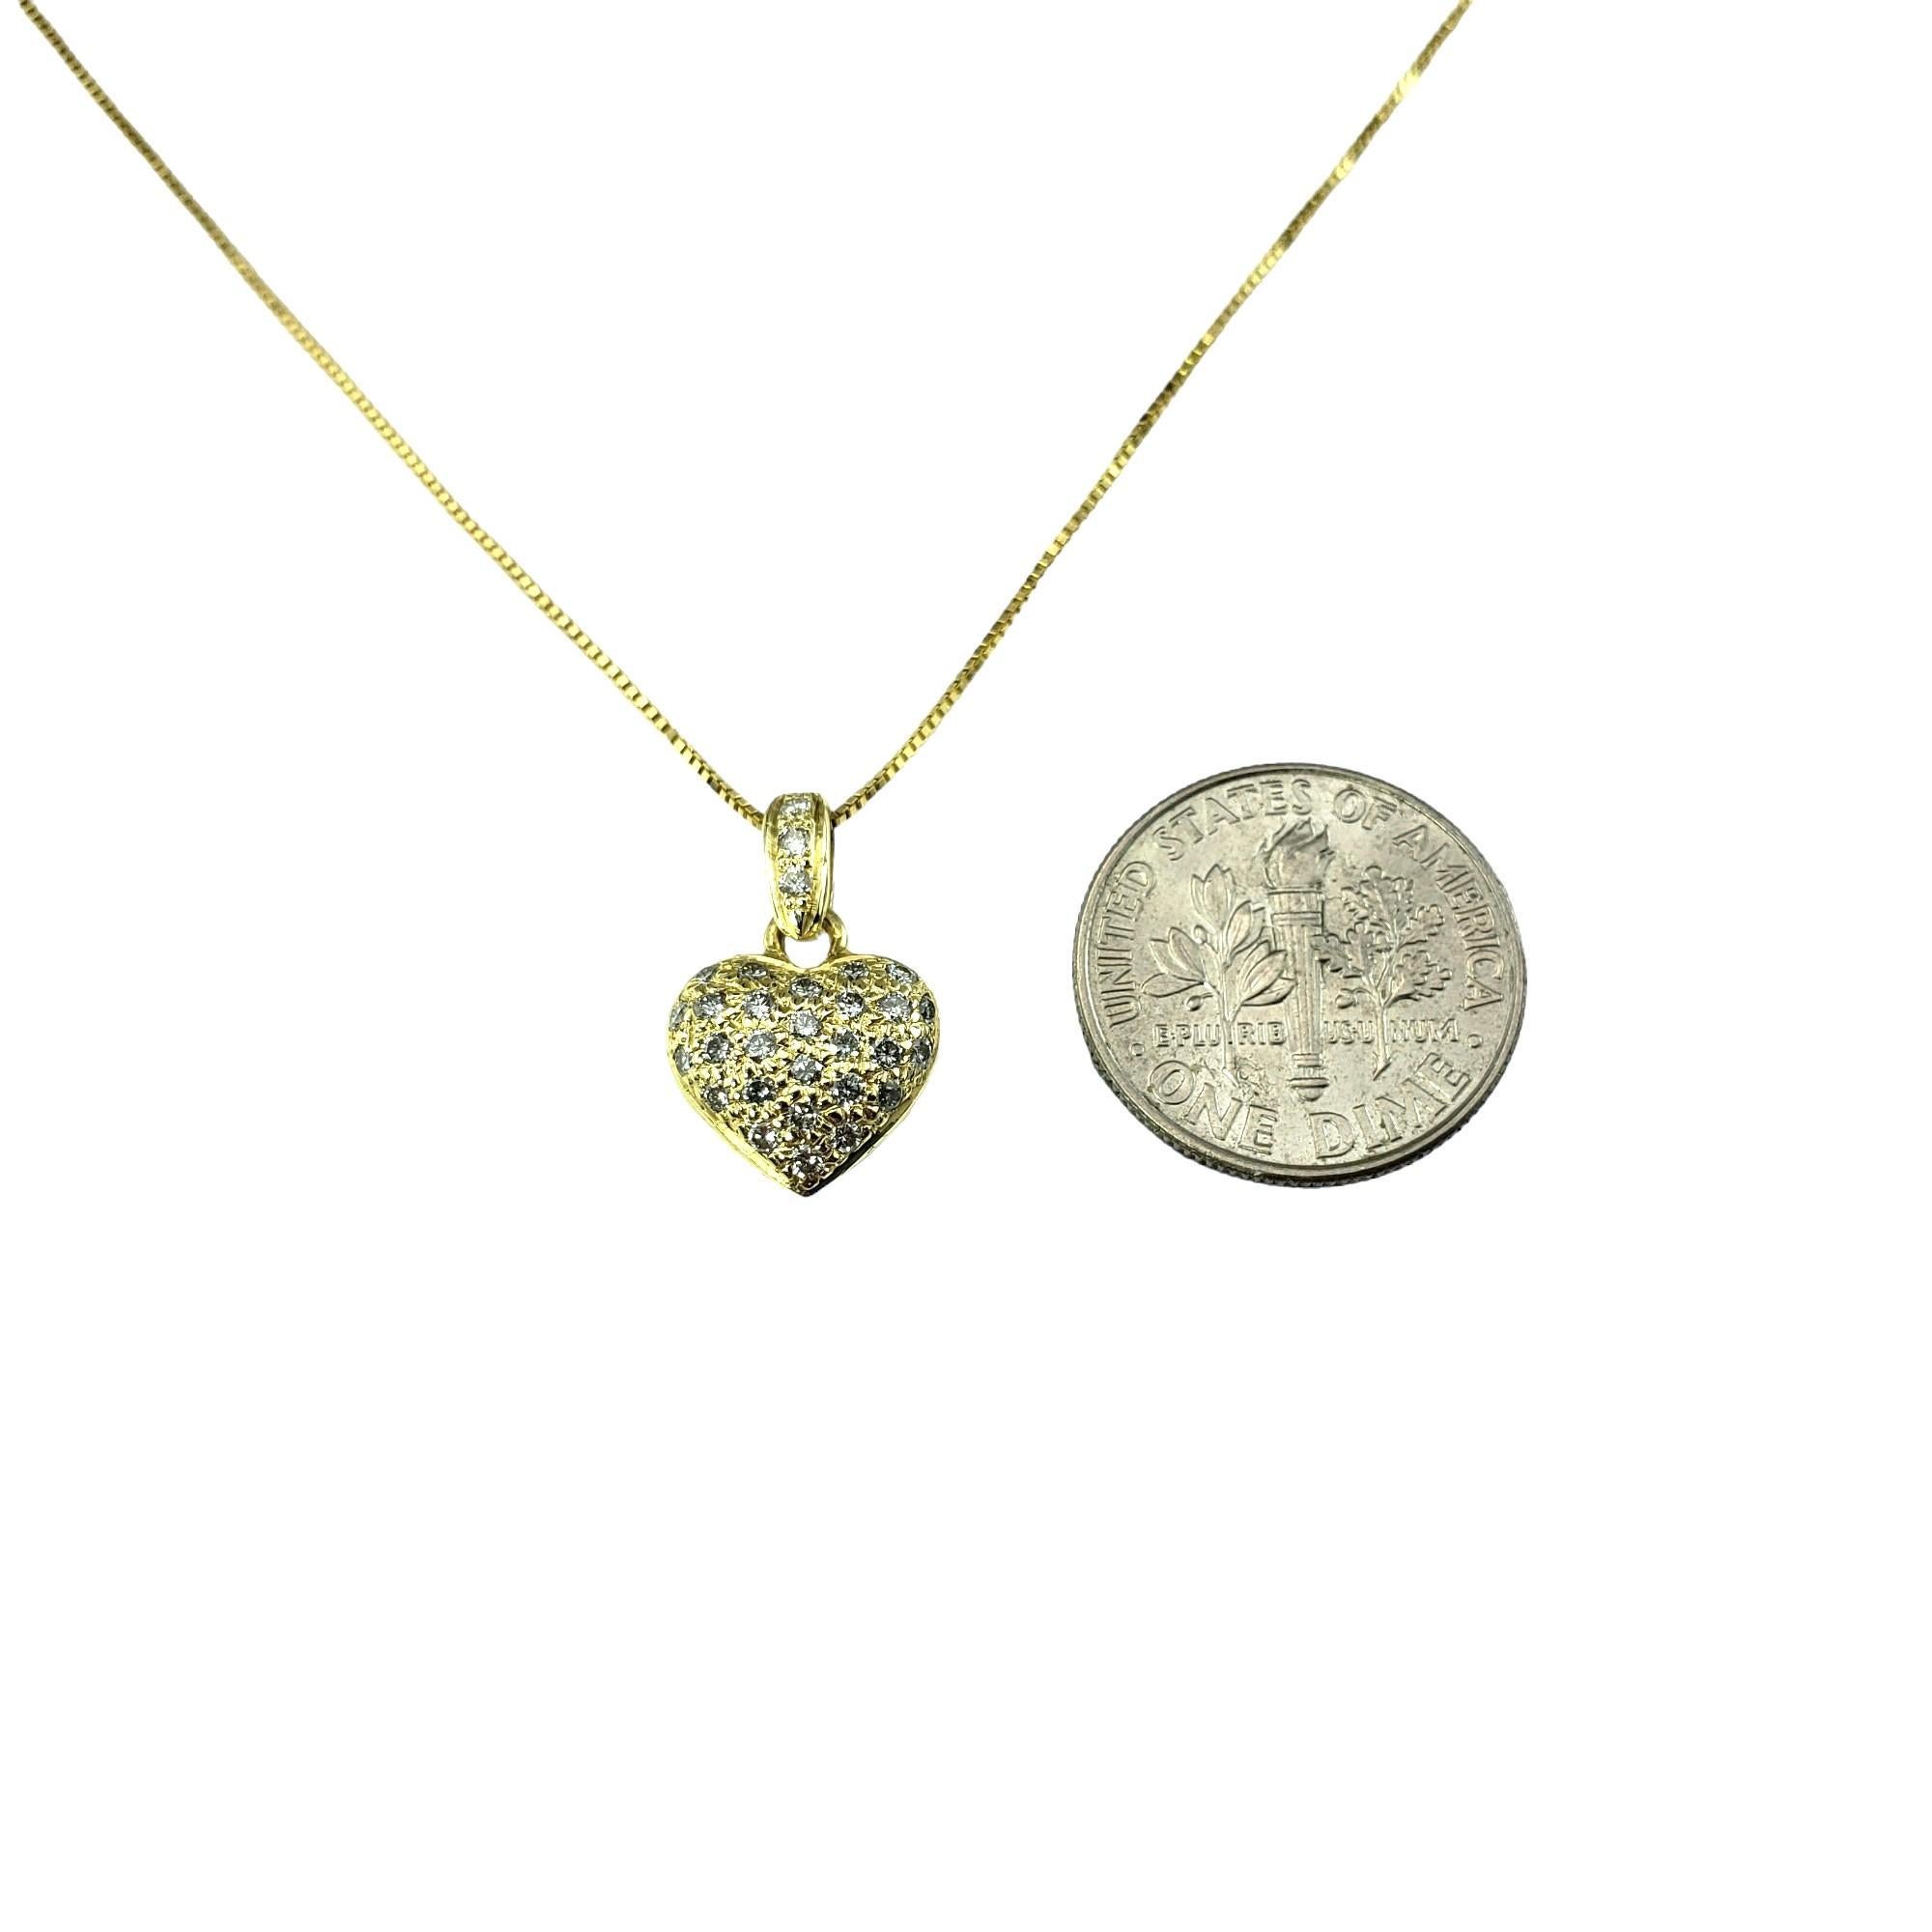 Vintage 14 Karat Yellow Gold and Diamond Heart Pendant Necklace #15300 For Sale 2